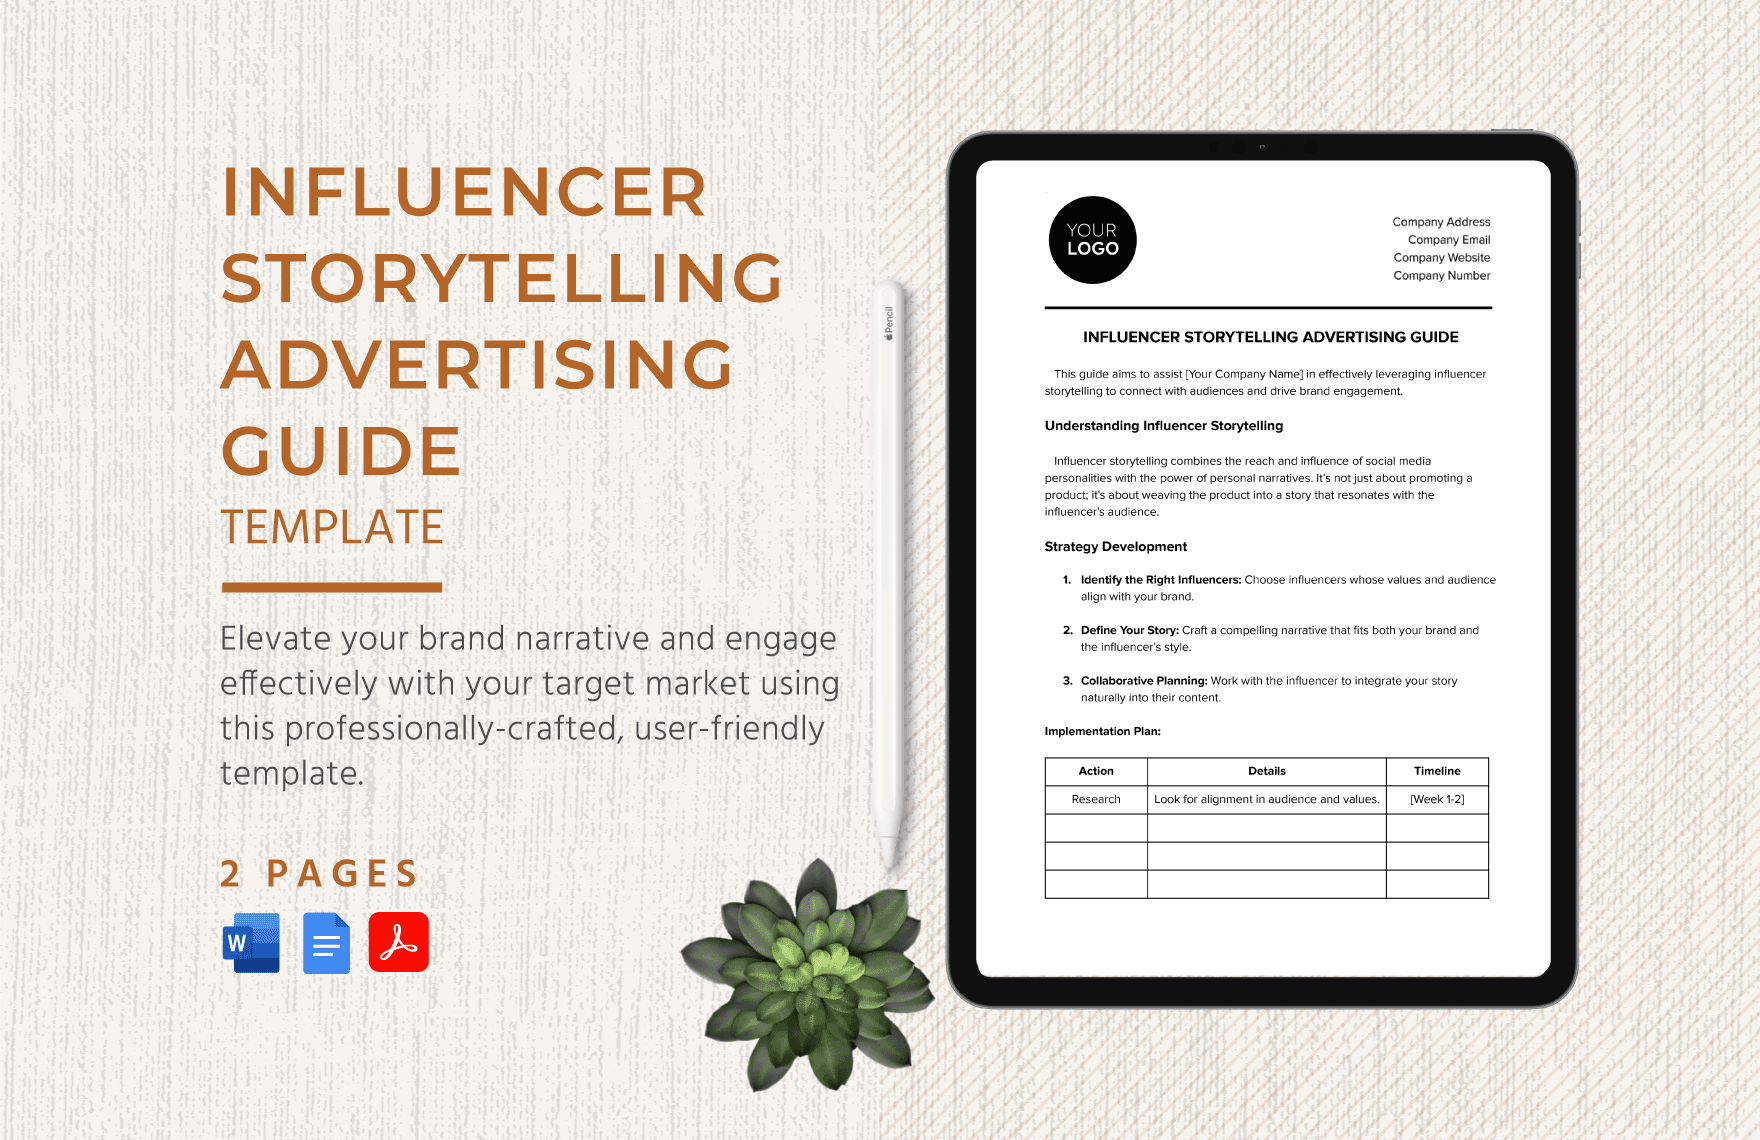 Influencer Storytelling Advertising Guide Template